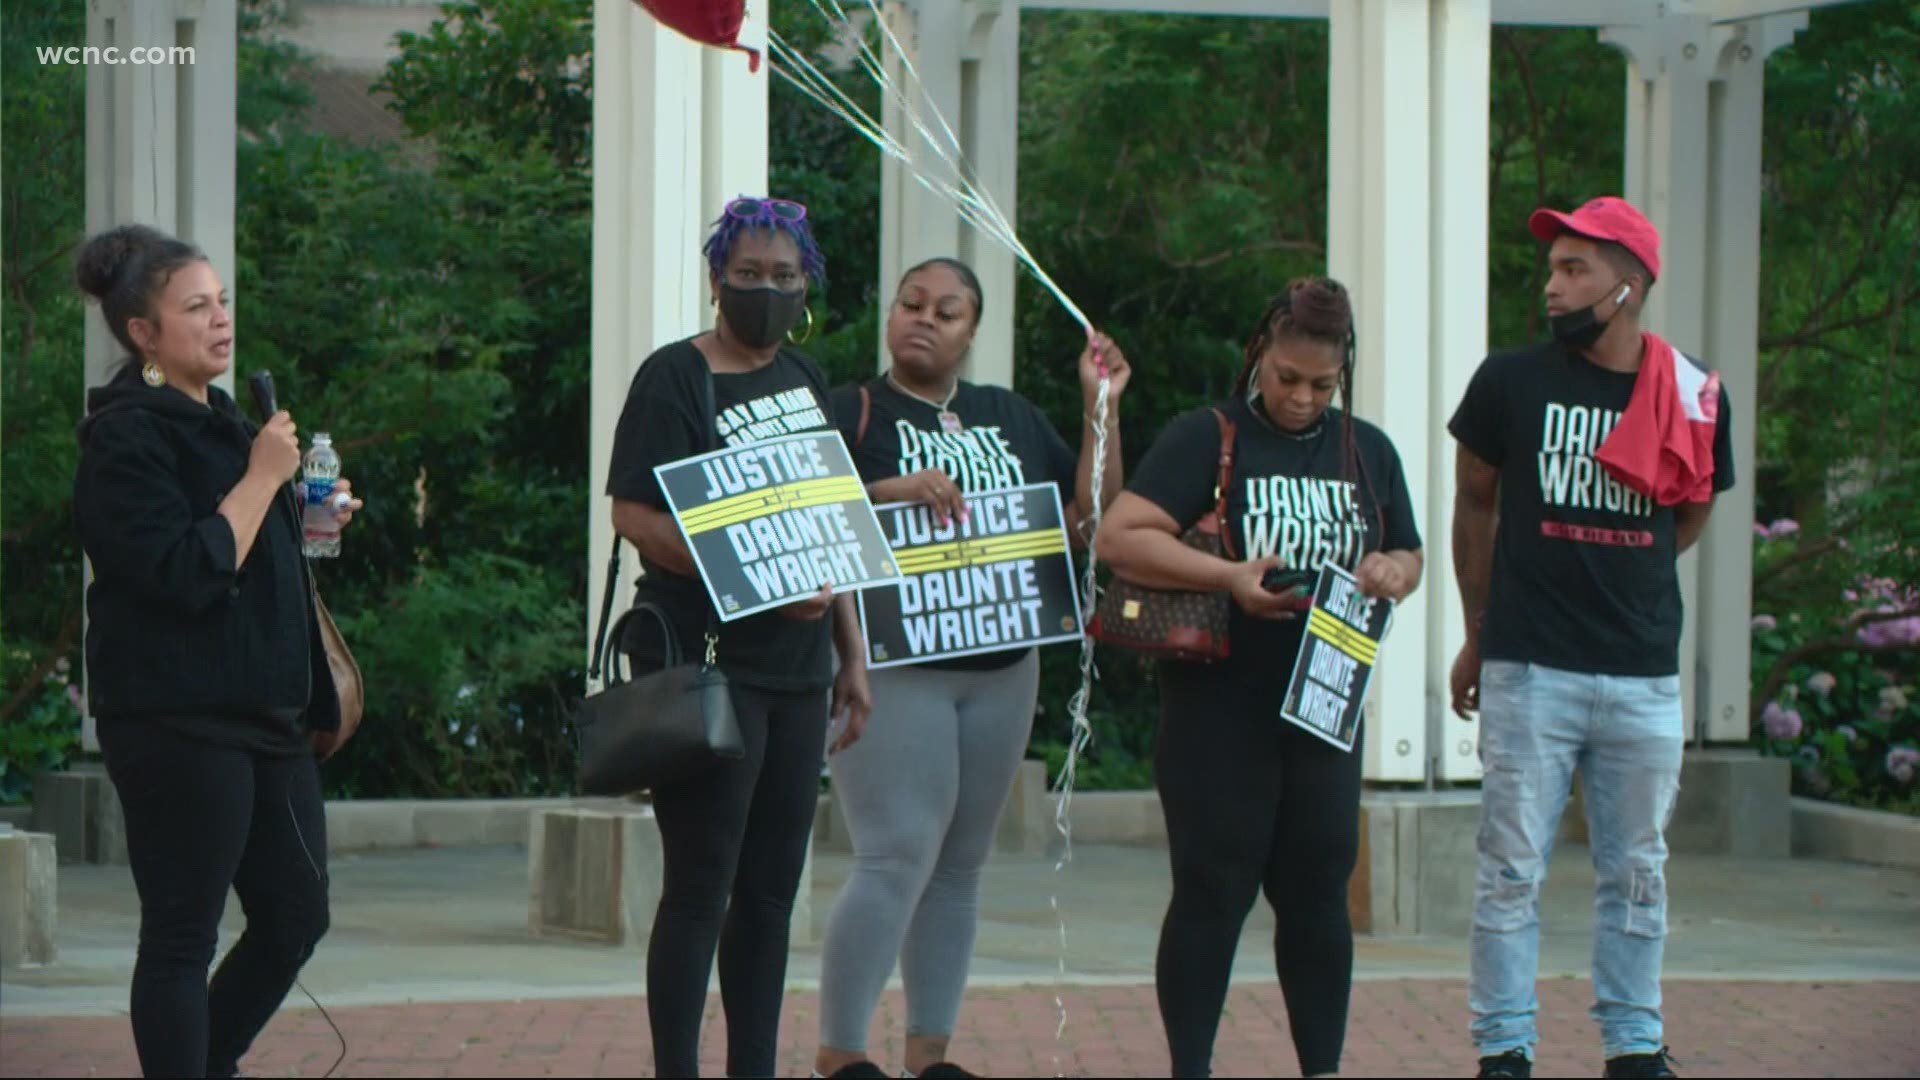 The vigil was held for the 20-year-old at Romare Bearden Park in Charlotte.